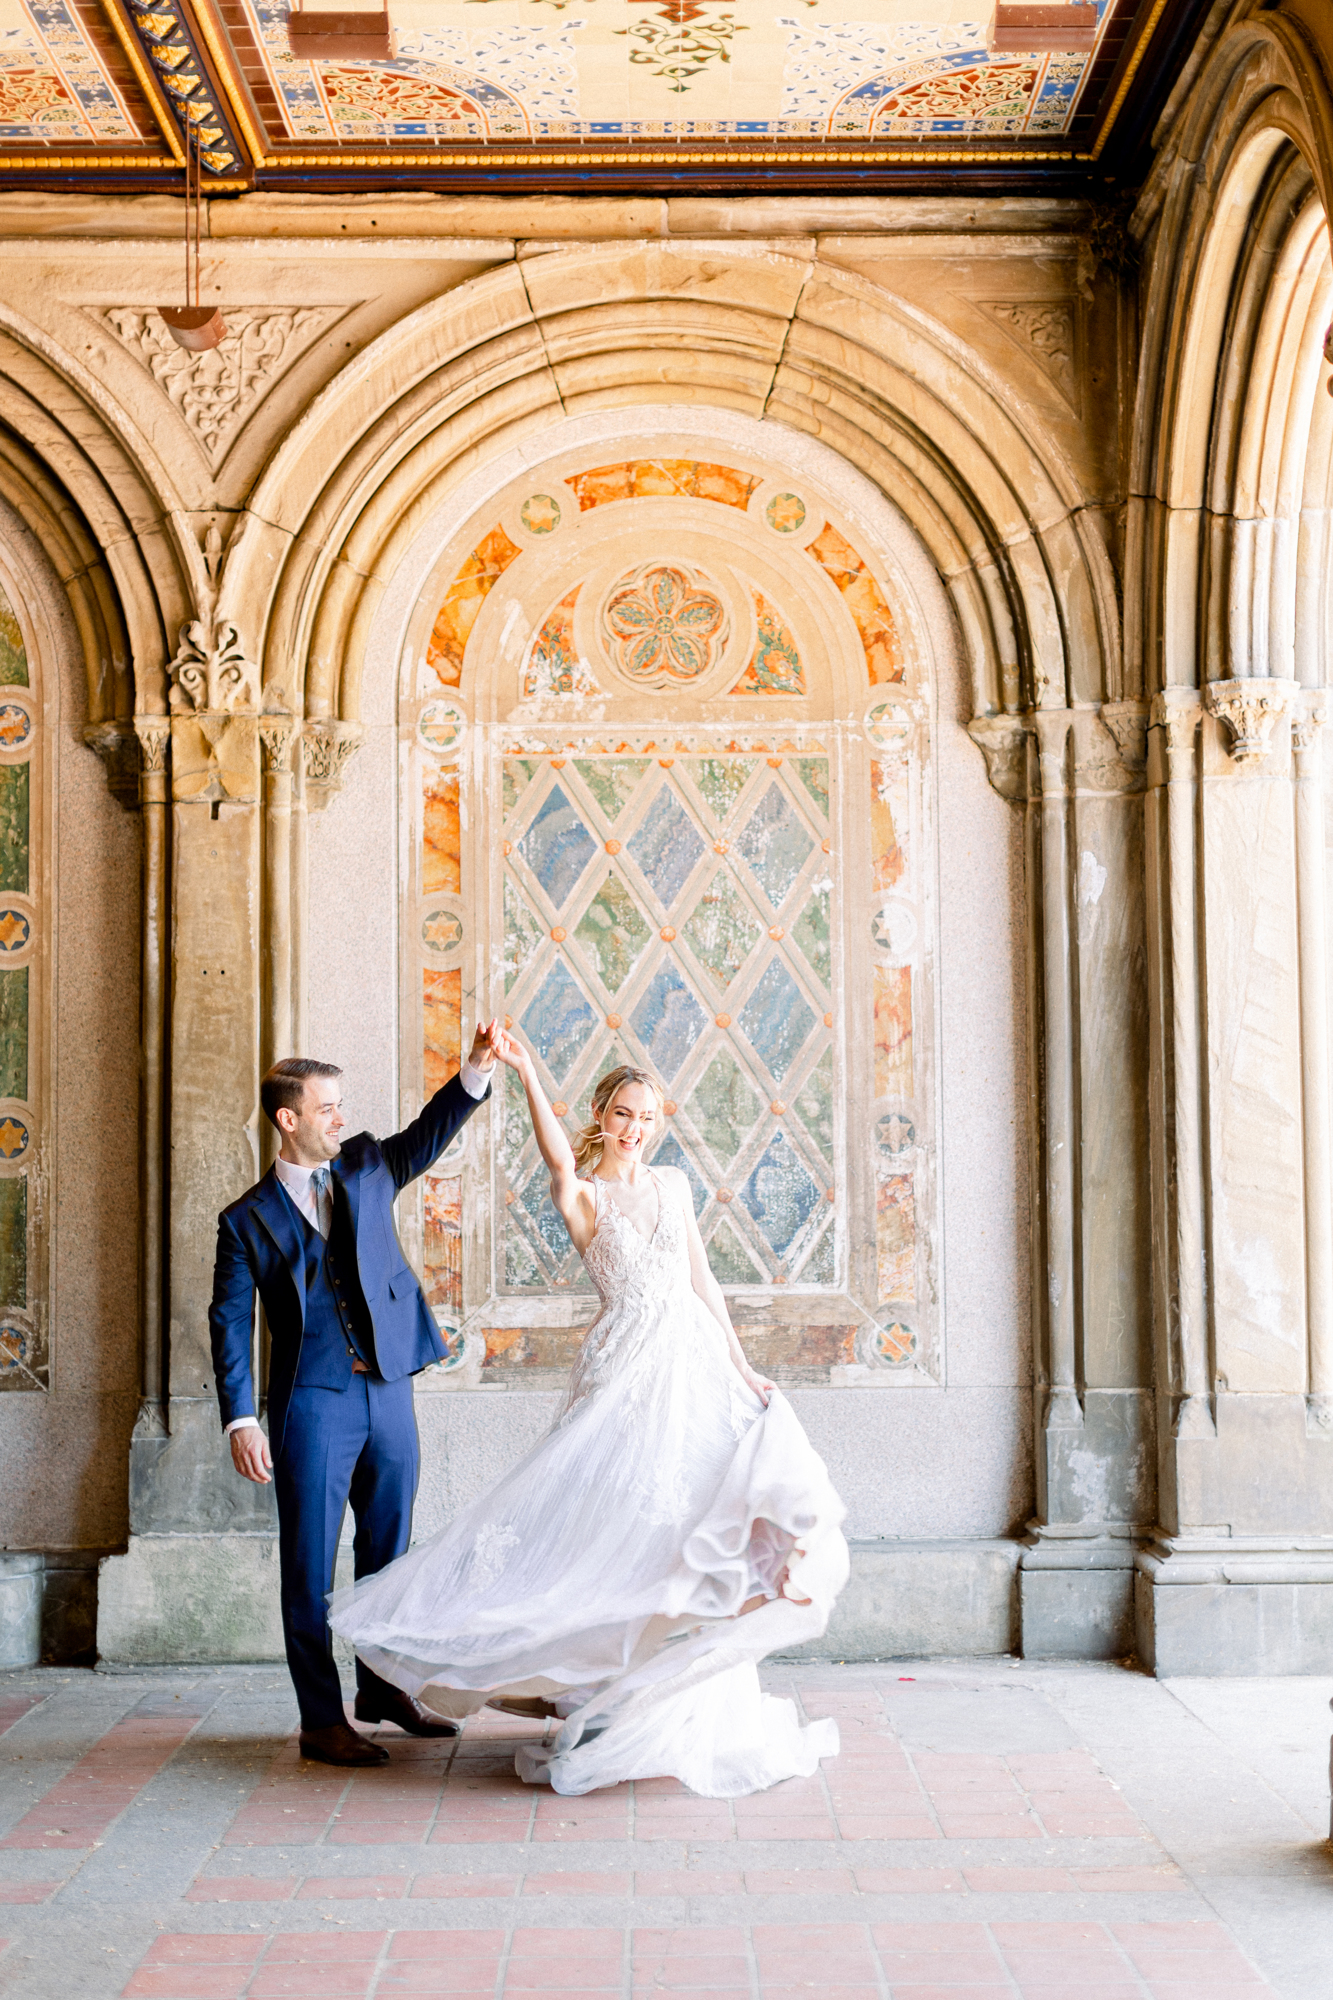 Candid Elopement Photos in Central Park's Spring Wisteria Pergola